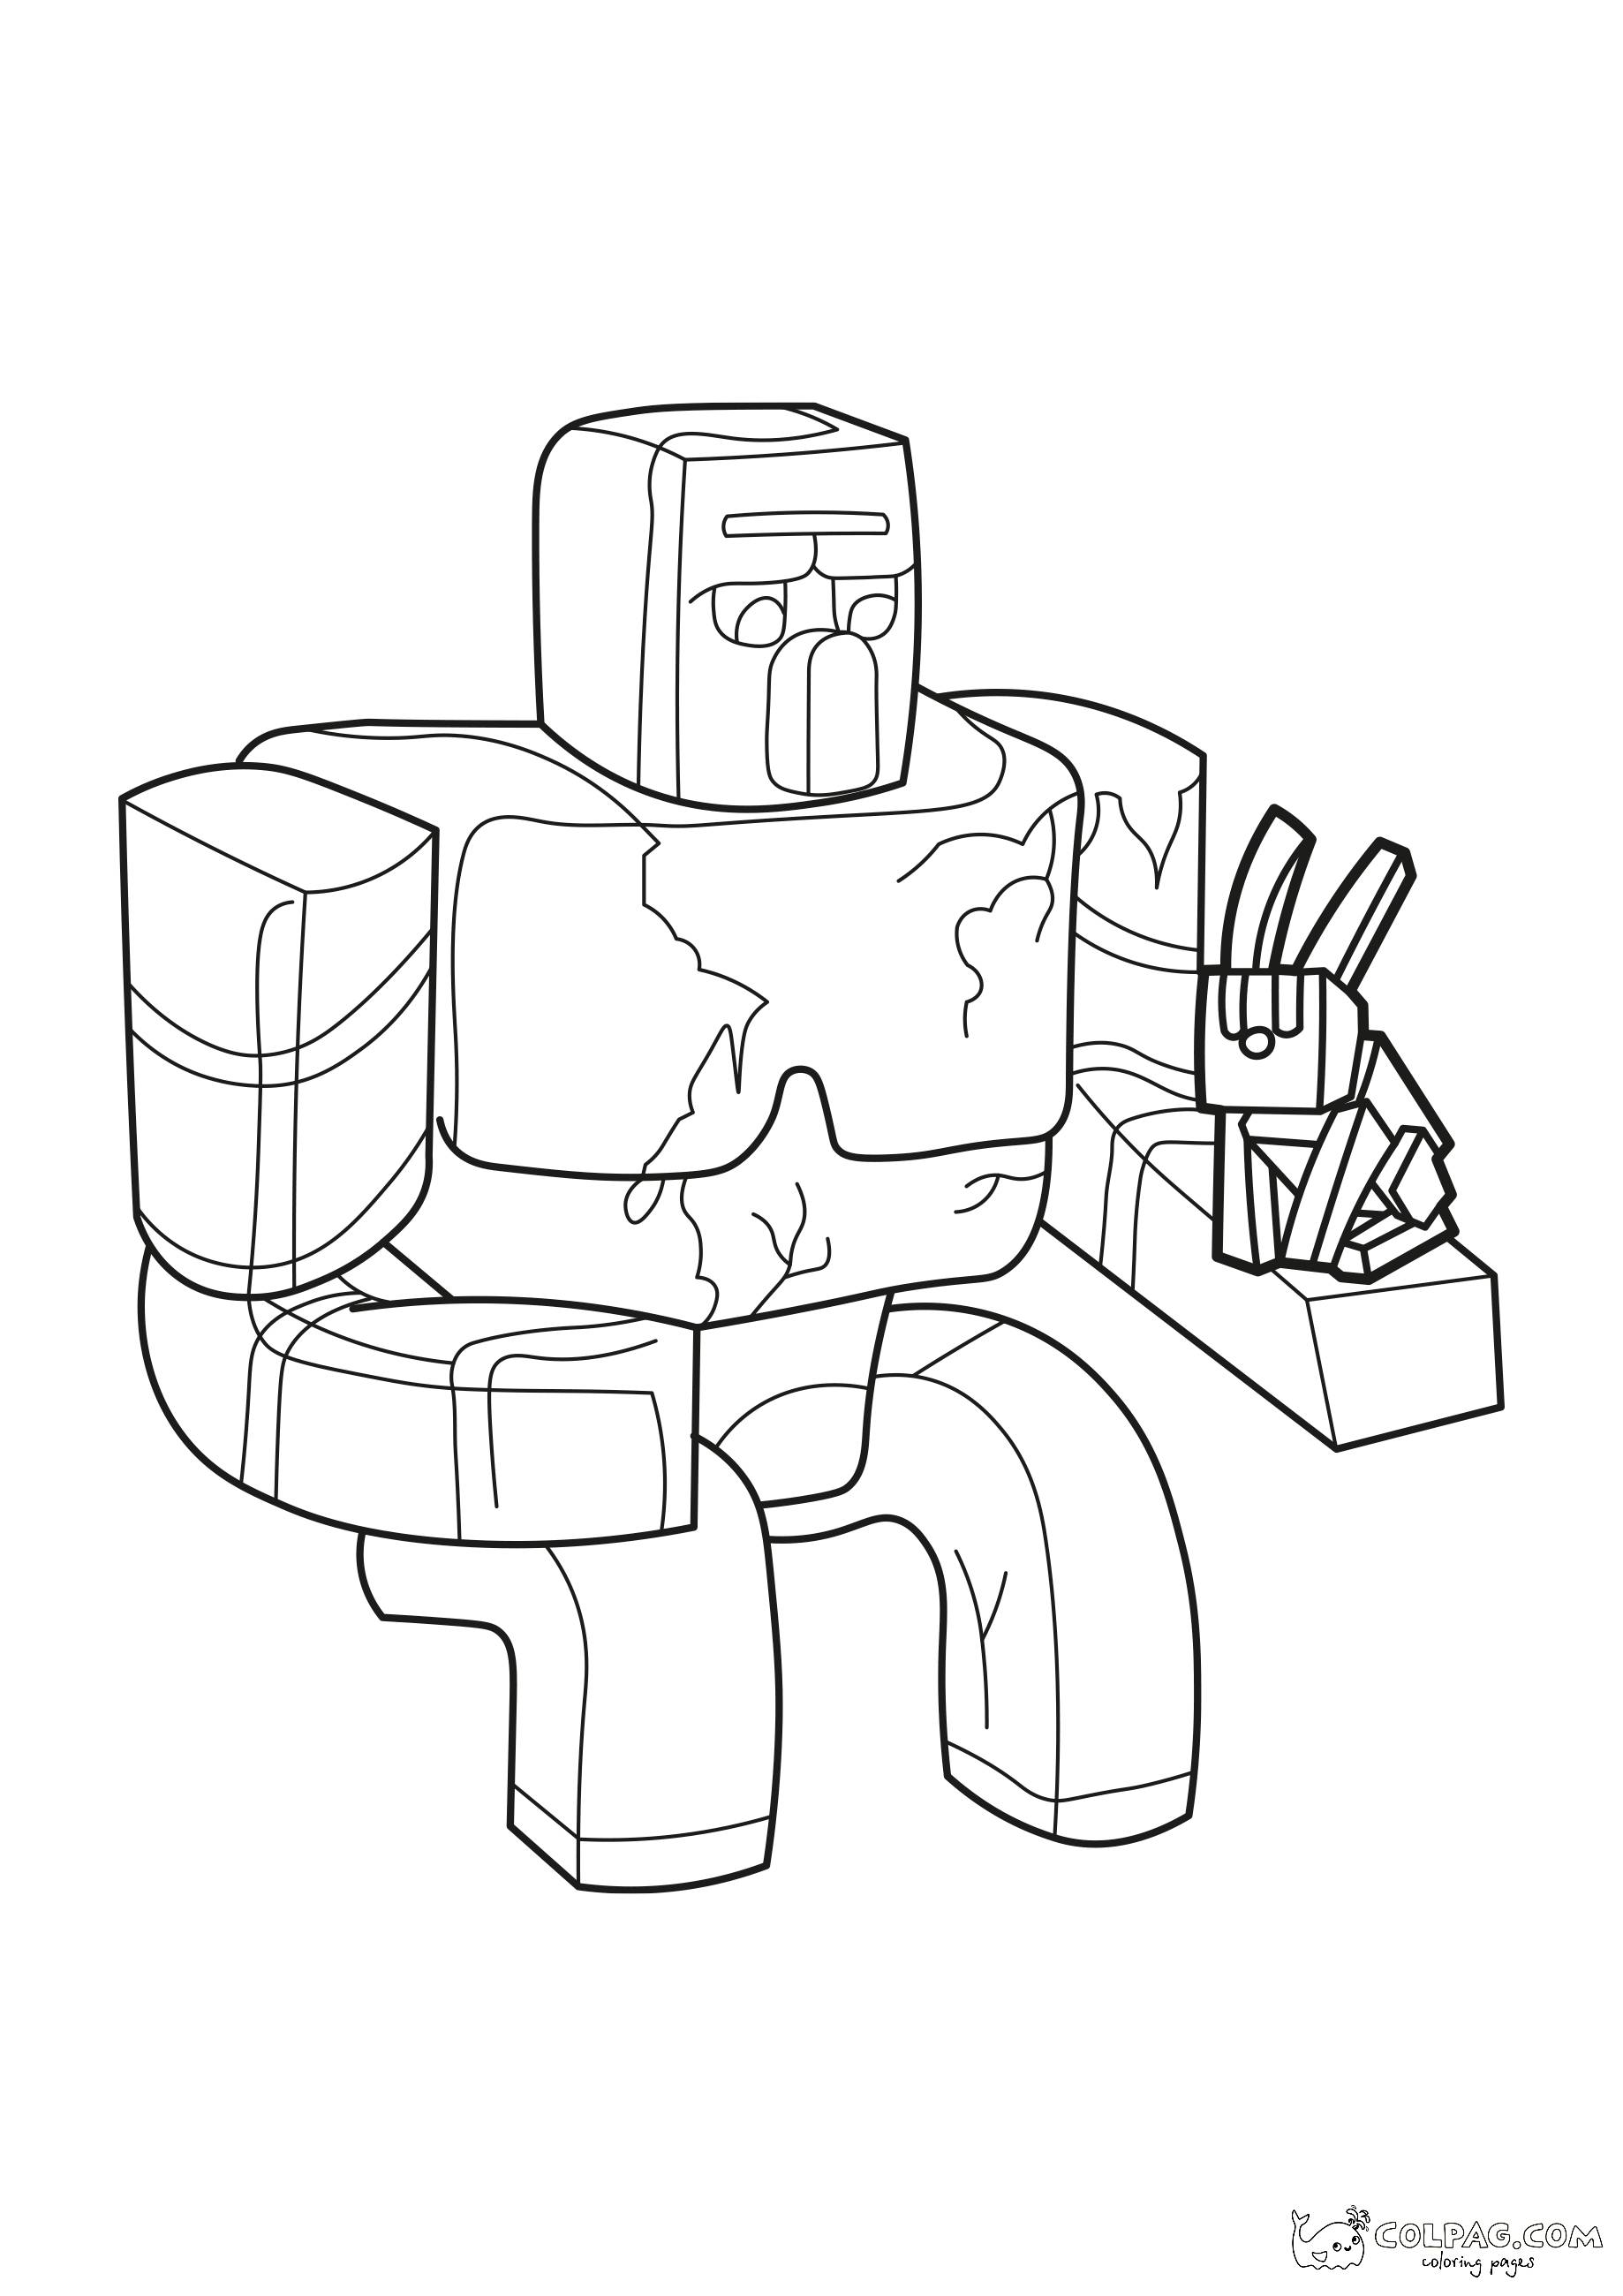 iron-golem-and-rabbit-minecraft-coloring-page-colpag